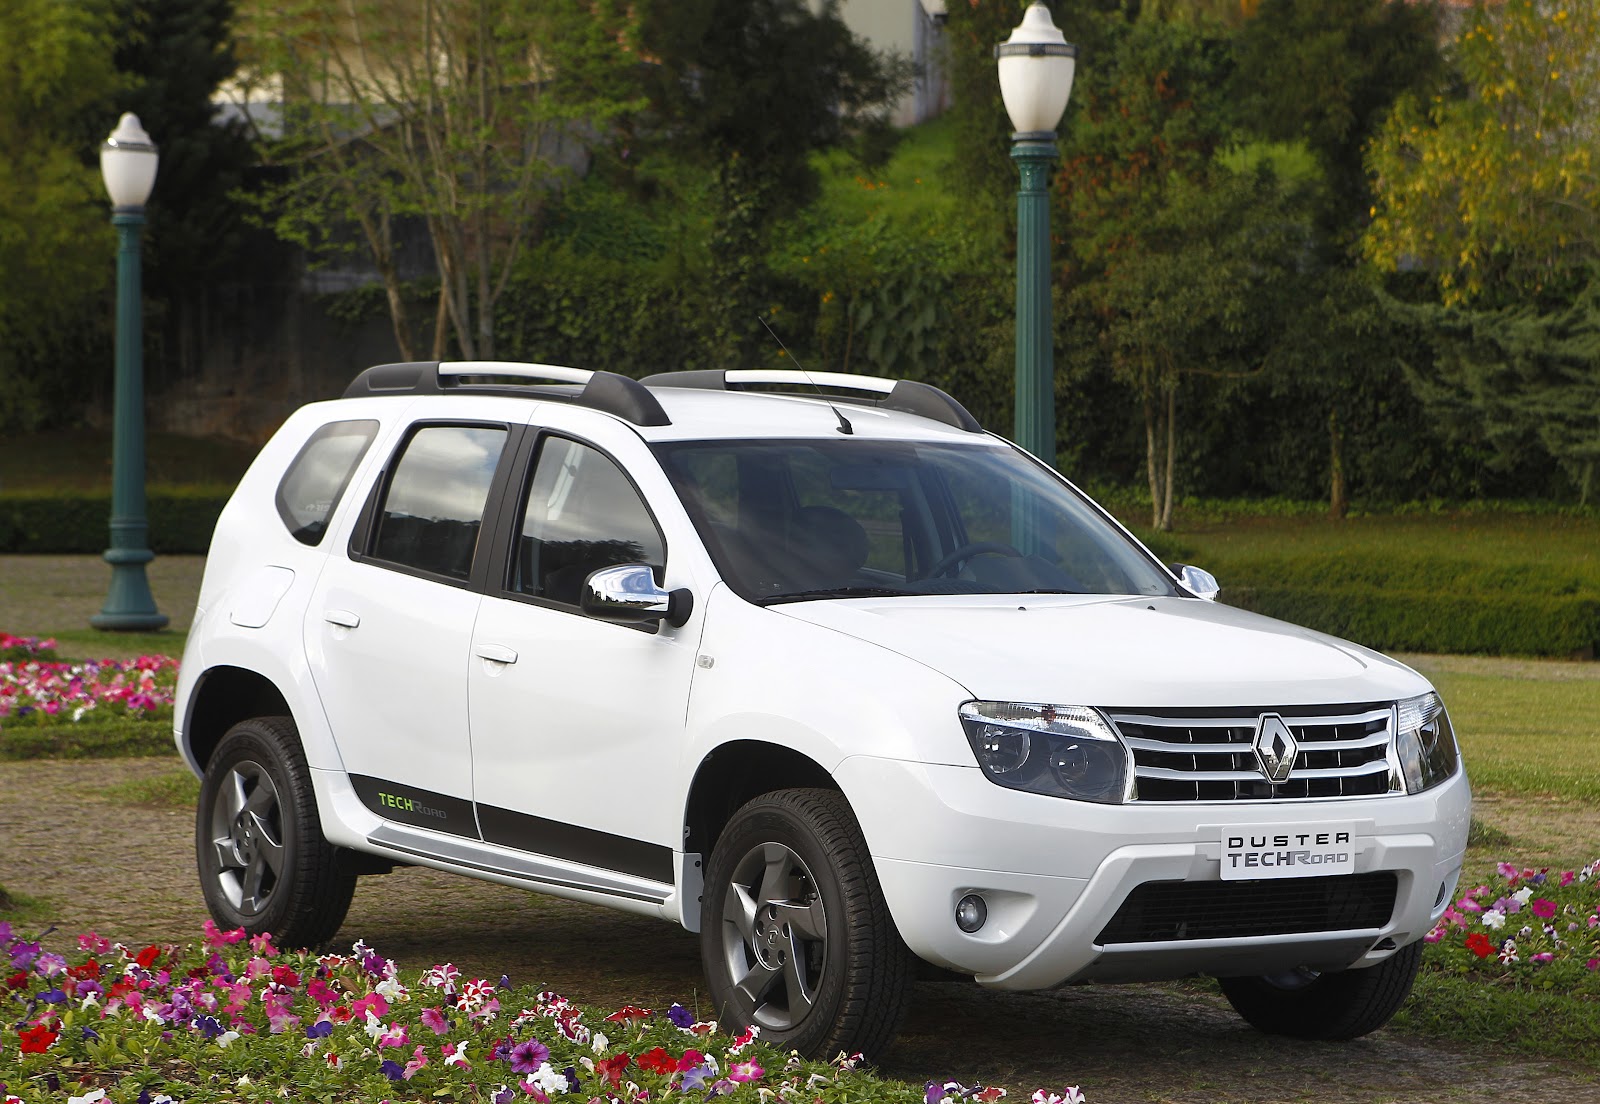 NOT CIA S RIE LIMITADA RENAULT DUSTER  TECH  ROAD  